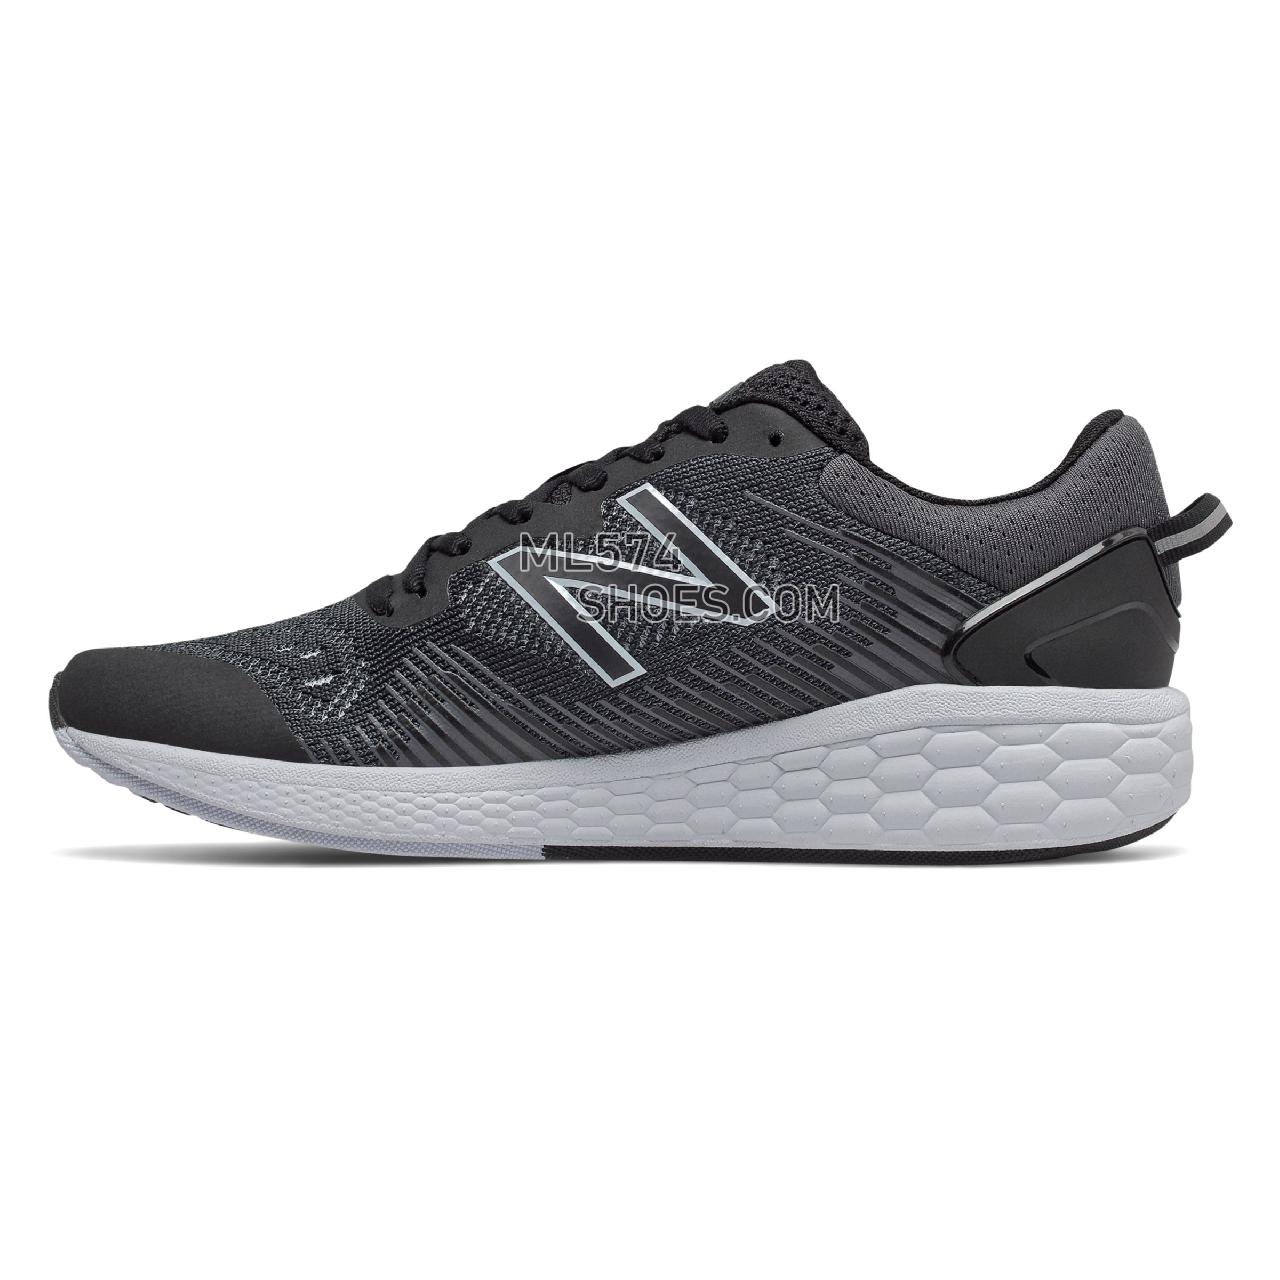 New Balance Fresh Foam Cross TR - Women's Workout - Black with Natural Indigo and Moon Dust - WXCTRLB1